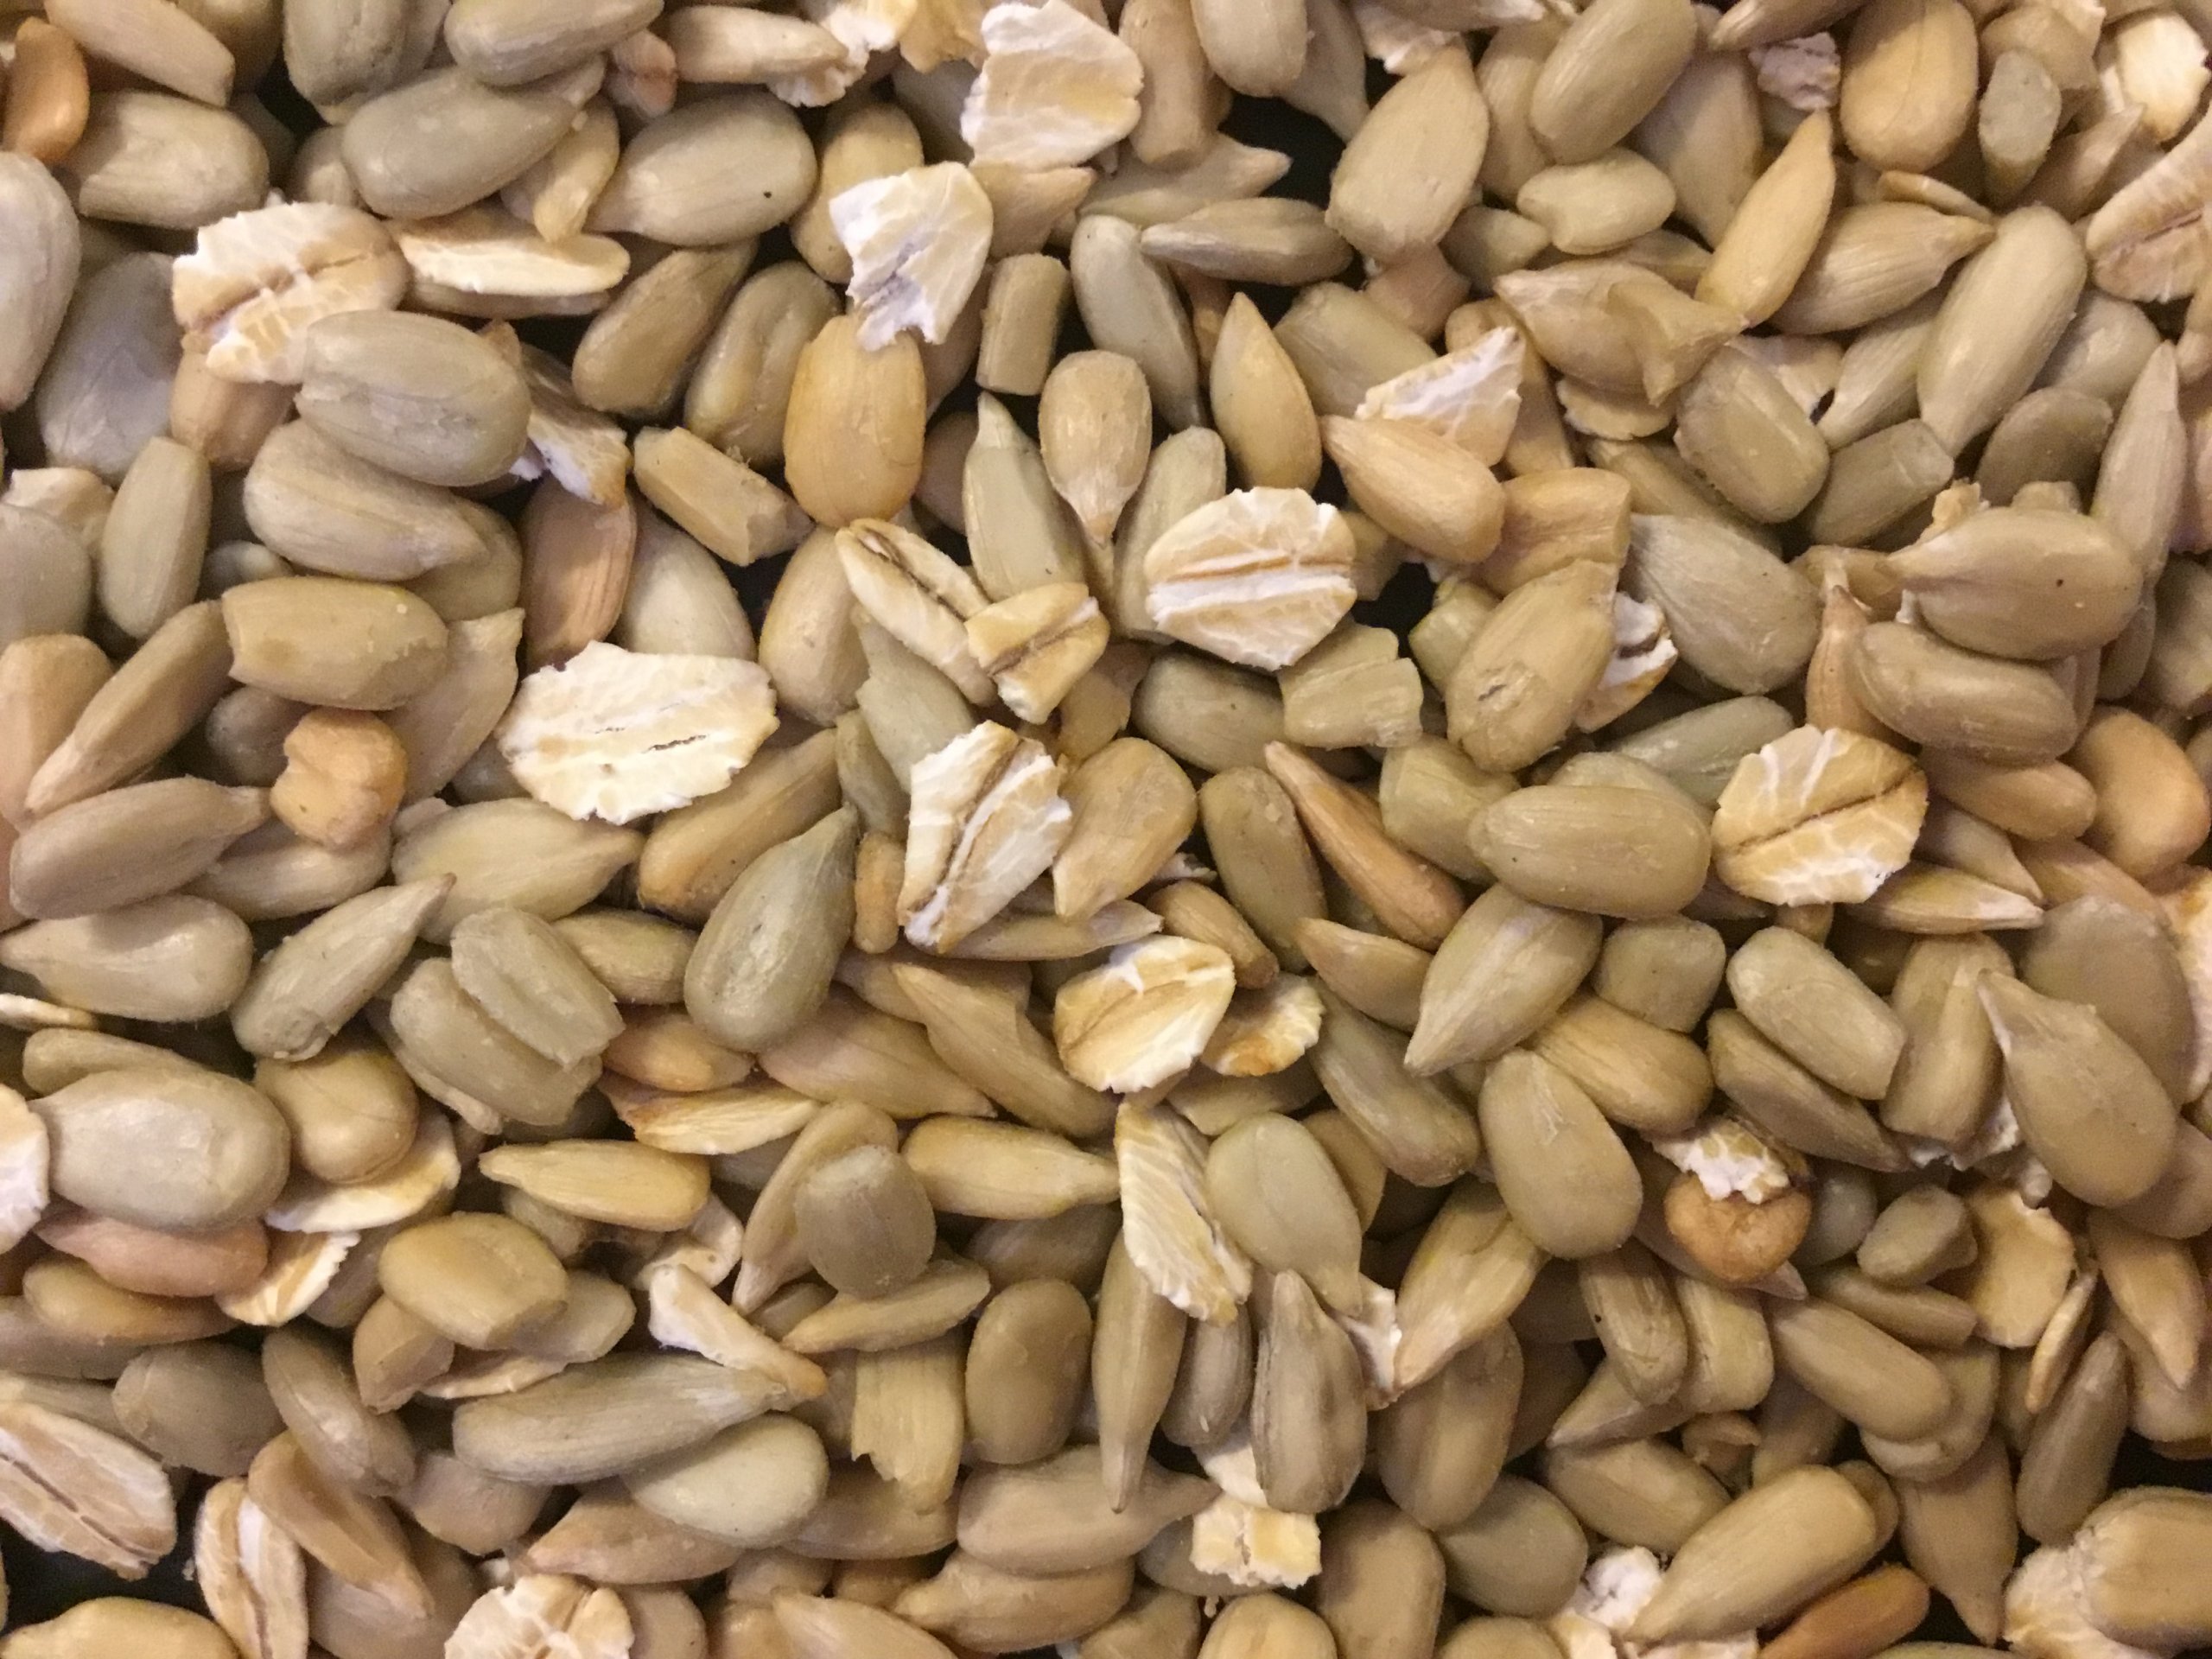 Toasted sunflower seeds and oats